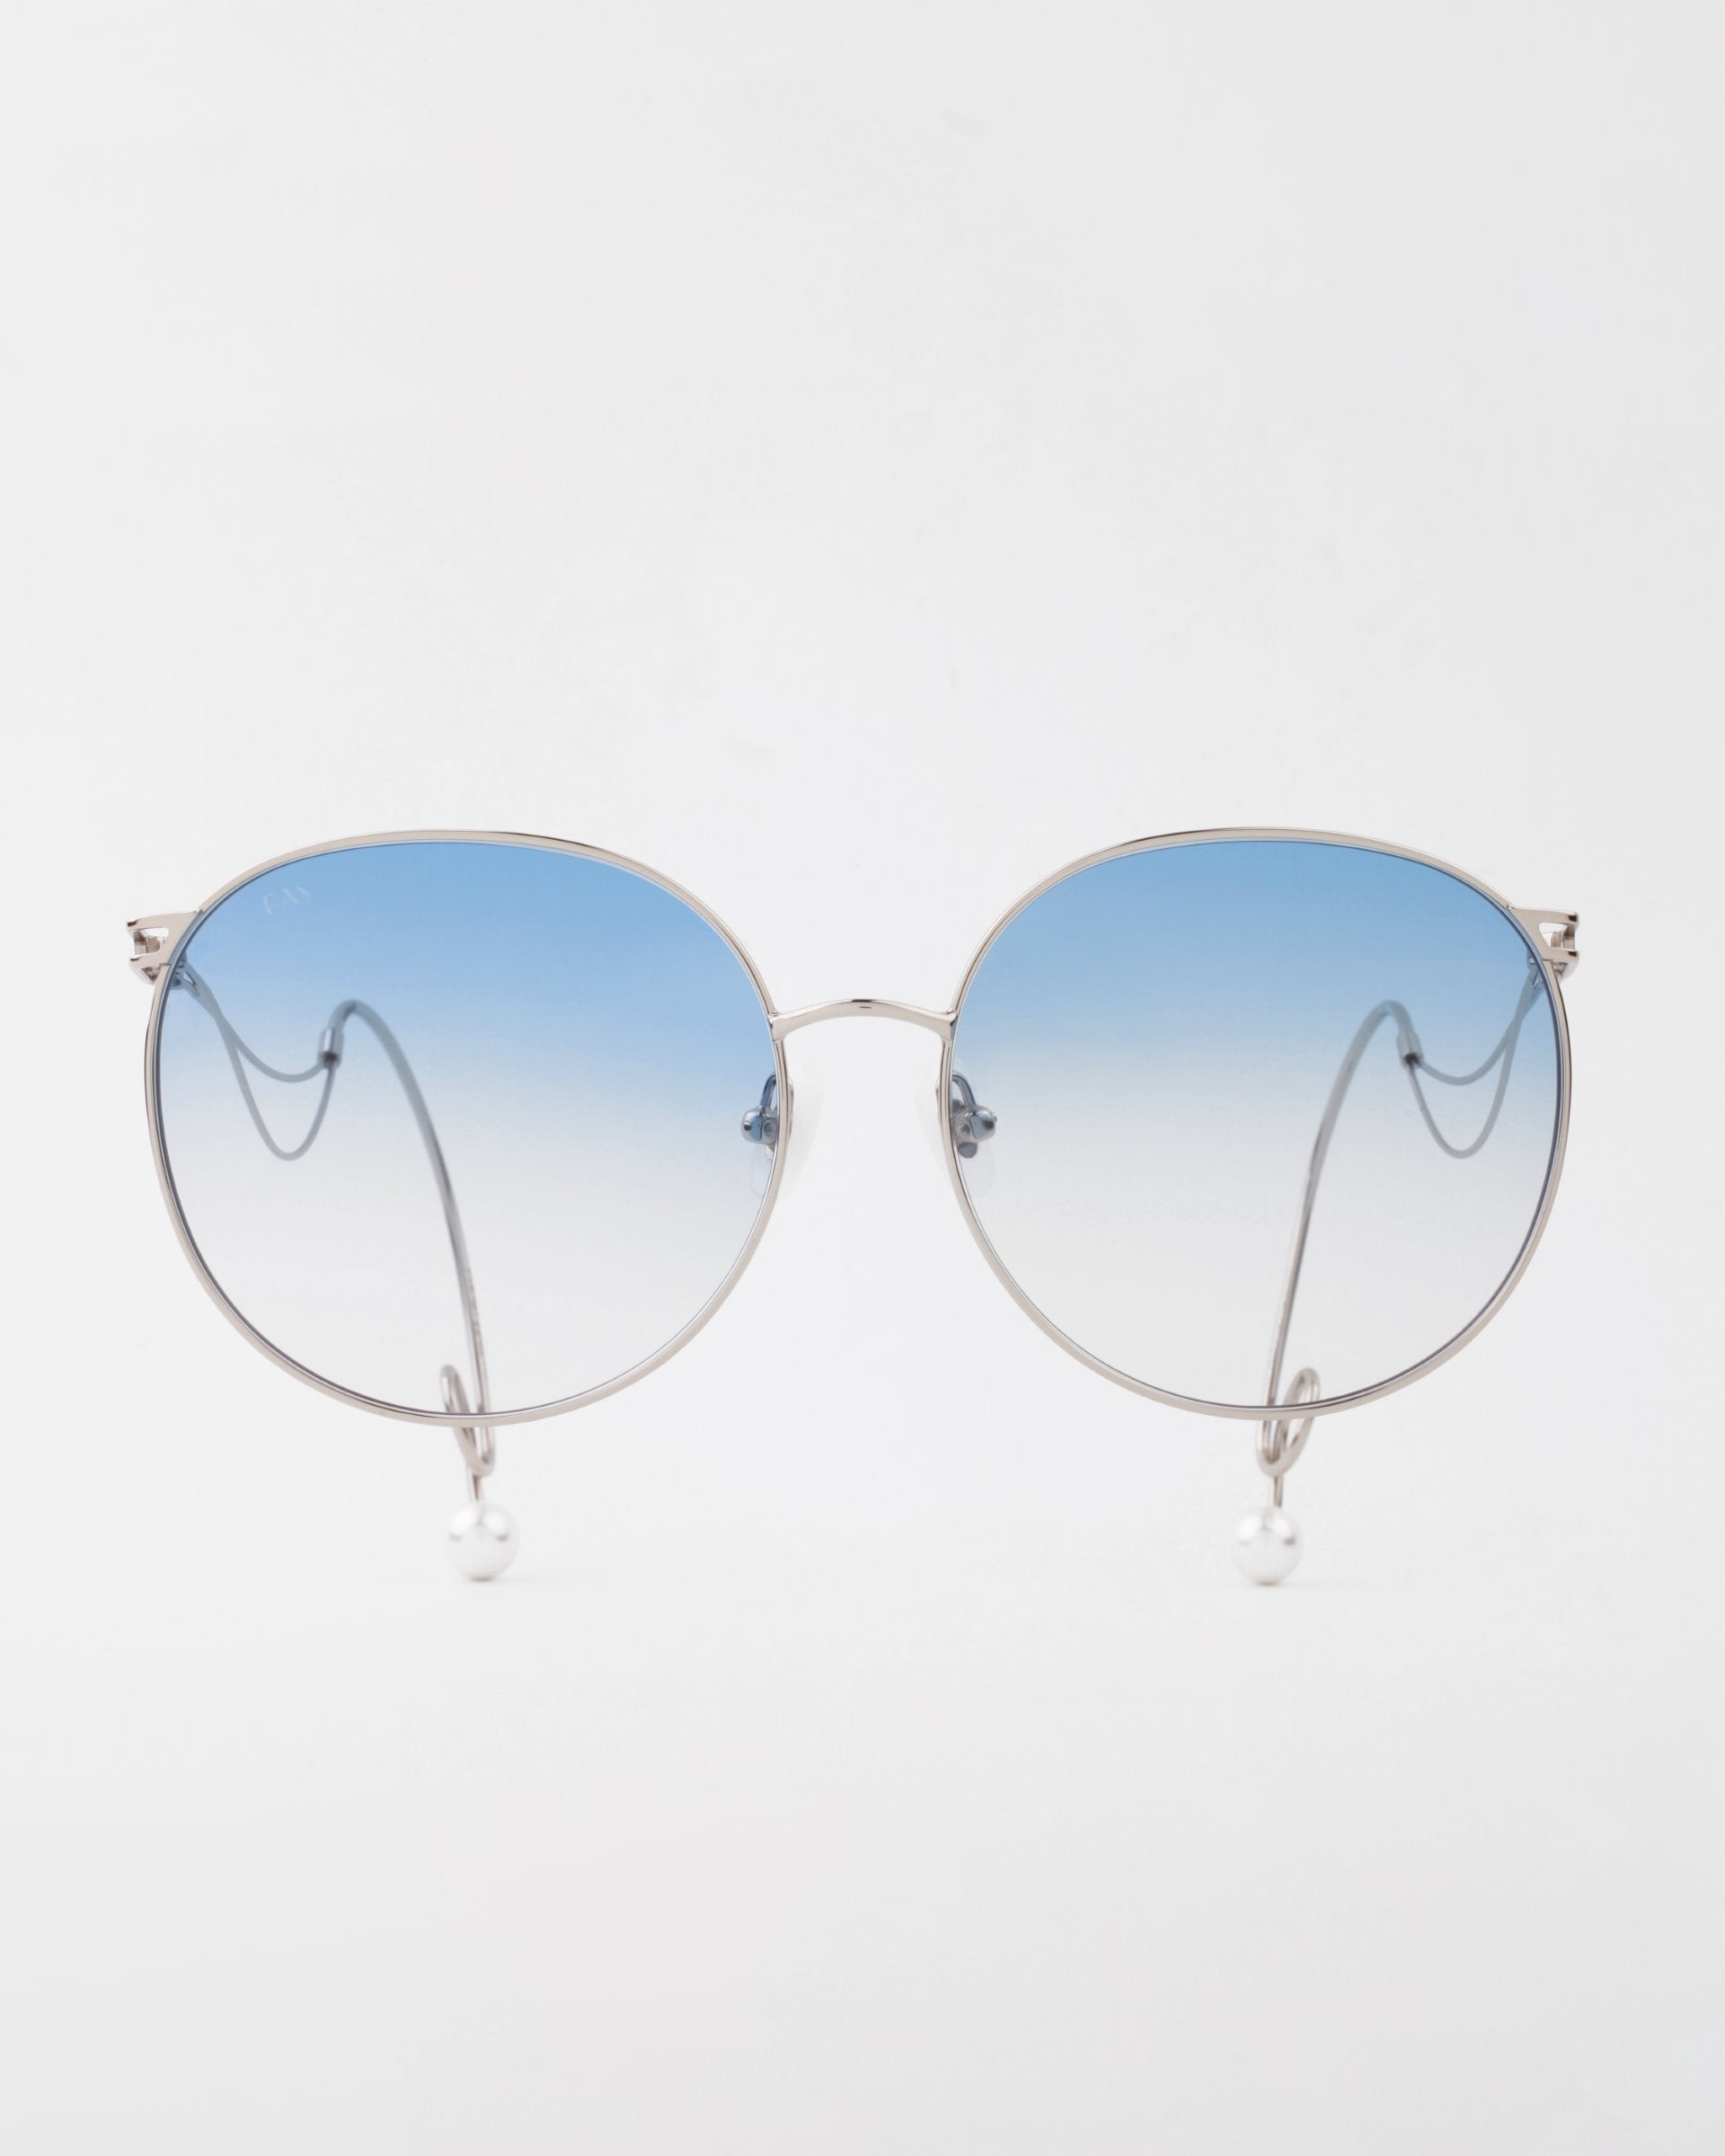 A pair of round For Art's Sake® Birthday Cake sunglasses with a thin, handmade gold-plated frame and blue gradient, lightweight shatter-resistant lenses. The temples have pearl accents at the ends, and the glasses are set against a plain white background.